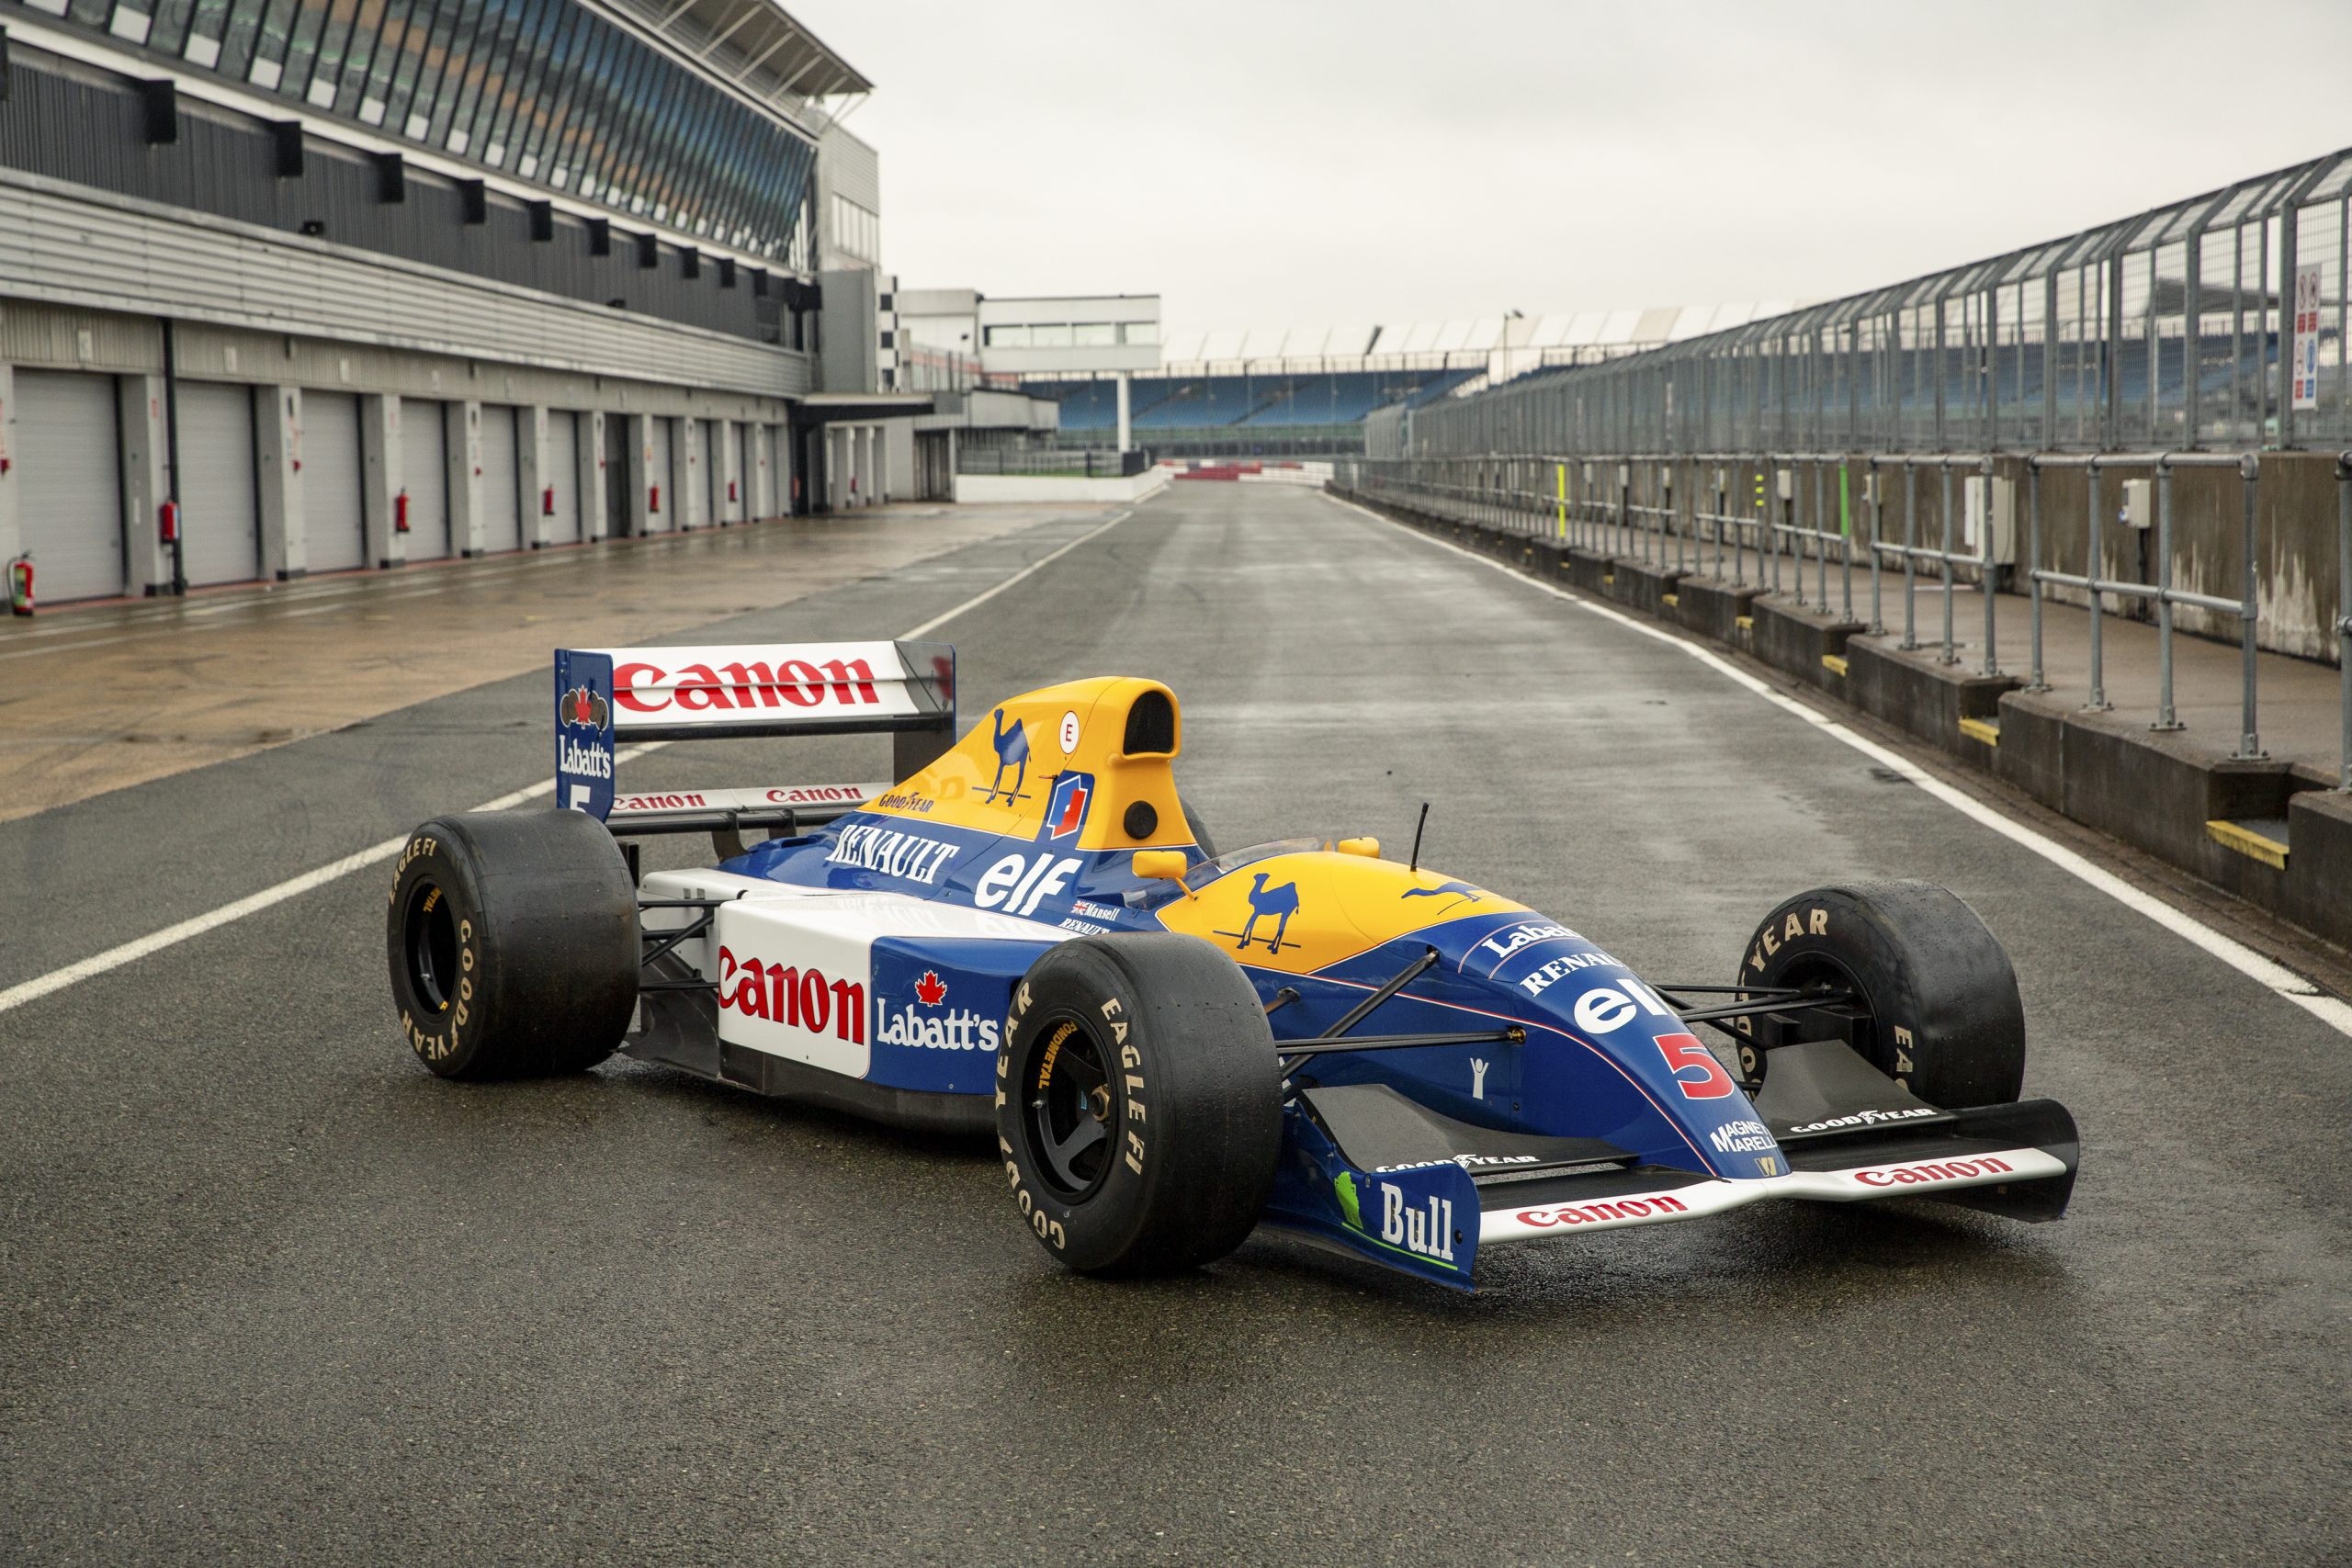 Nigel Mansell is selling his F1 car collection